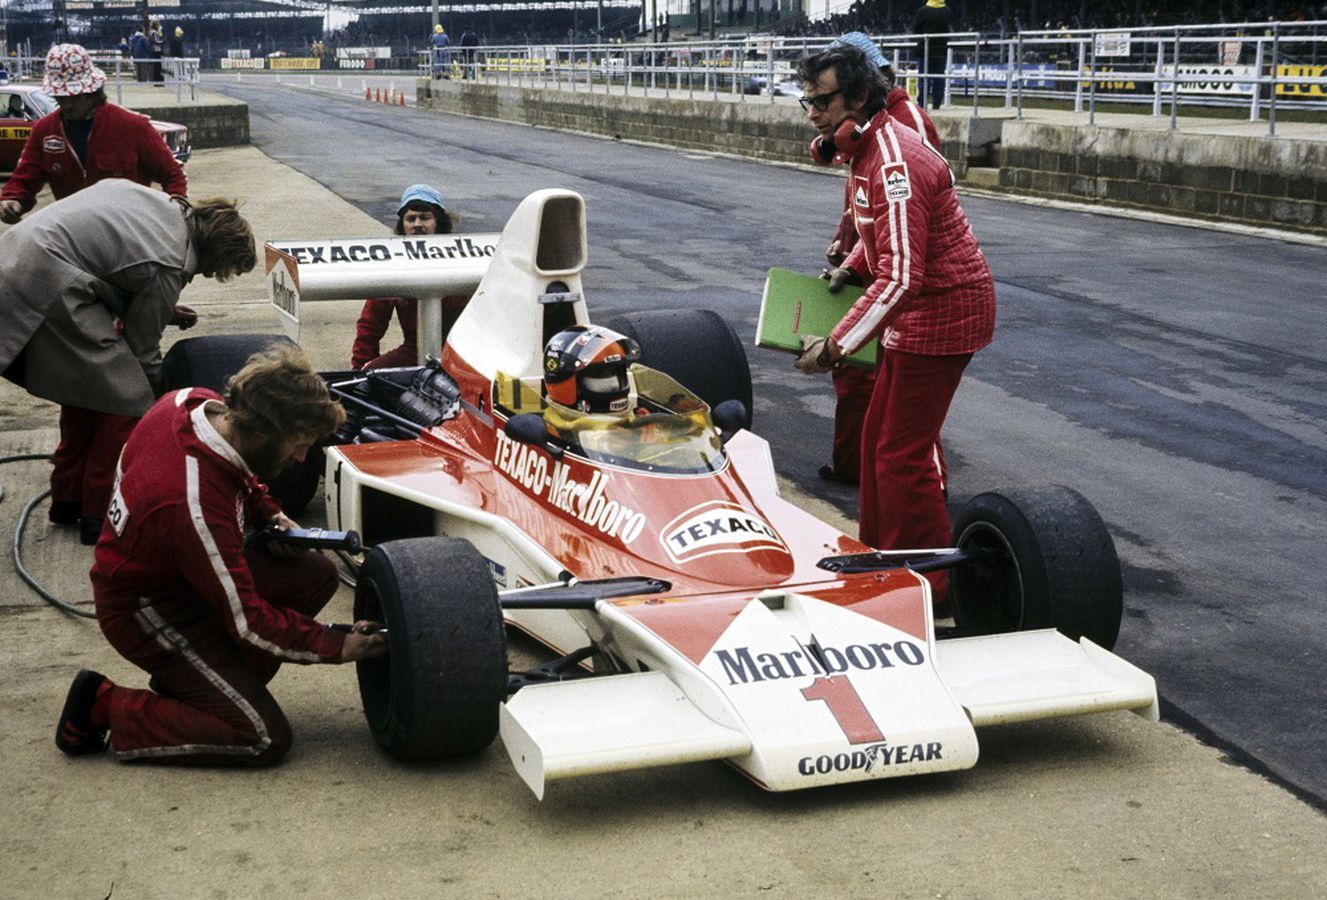 Emerson Fittipaldi missed out on victory to Niki Lauda by 0.1s in 1971